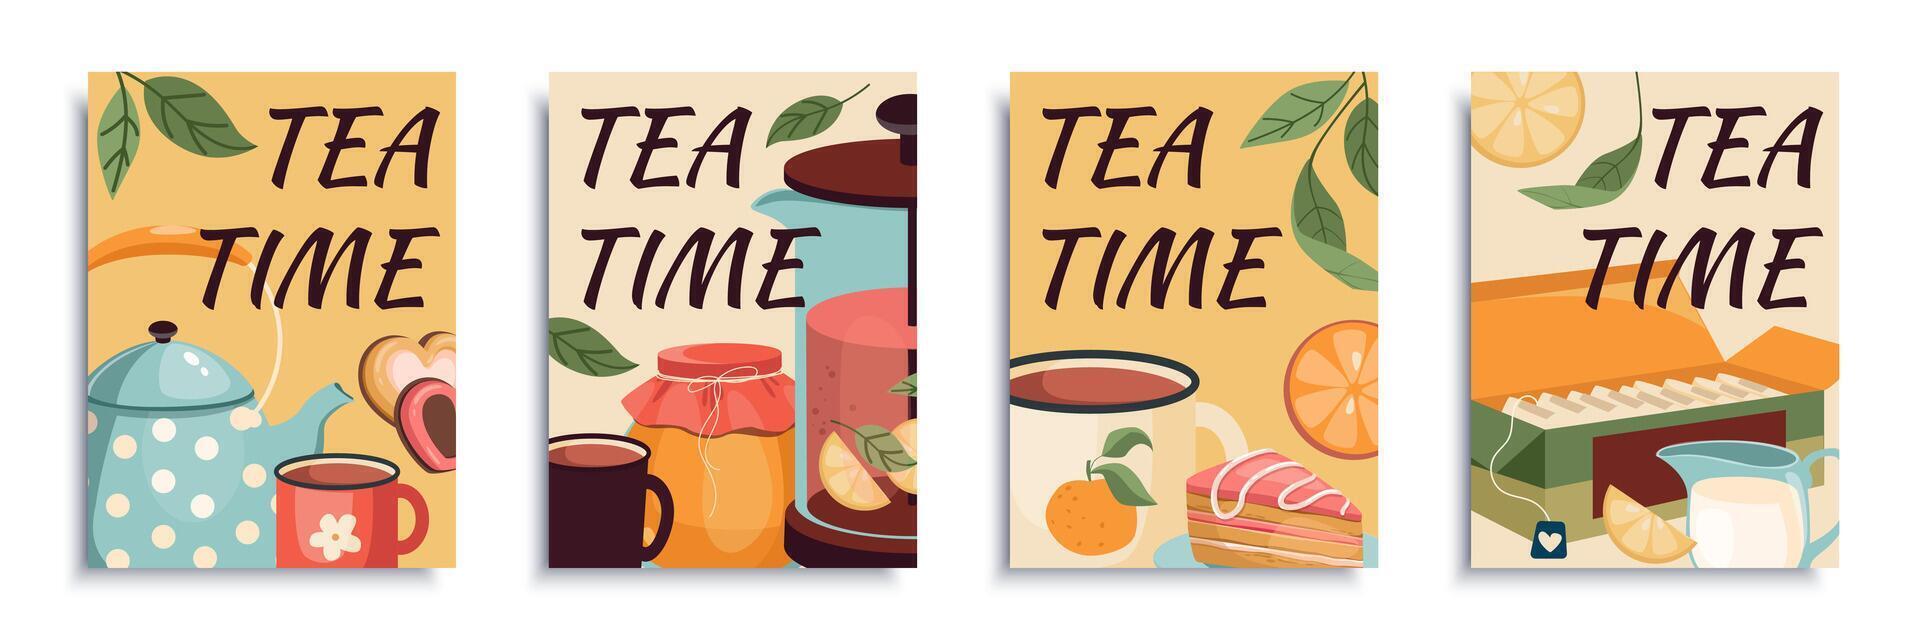 Tea time cover brochure set in flat design. Poster templates with cozy kettle, mugs and cups with beverage, honey or jam, milk in jar, lemons, cakes, cookies, tea packages in box. Vector illustration.